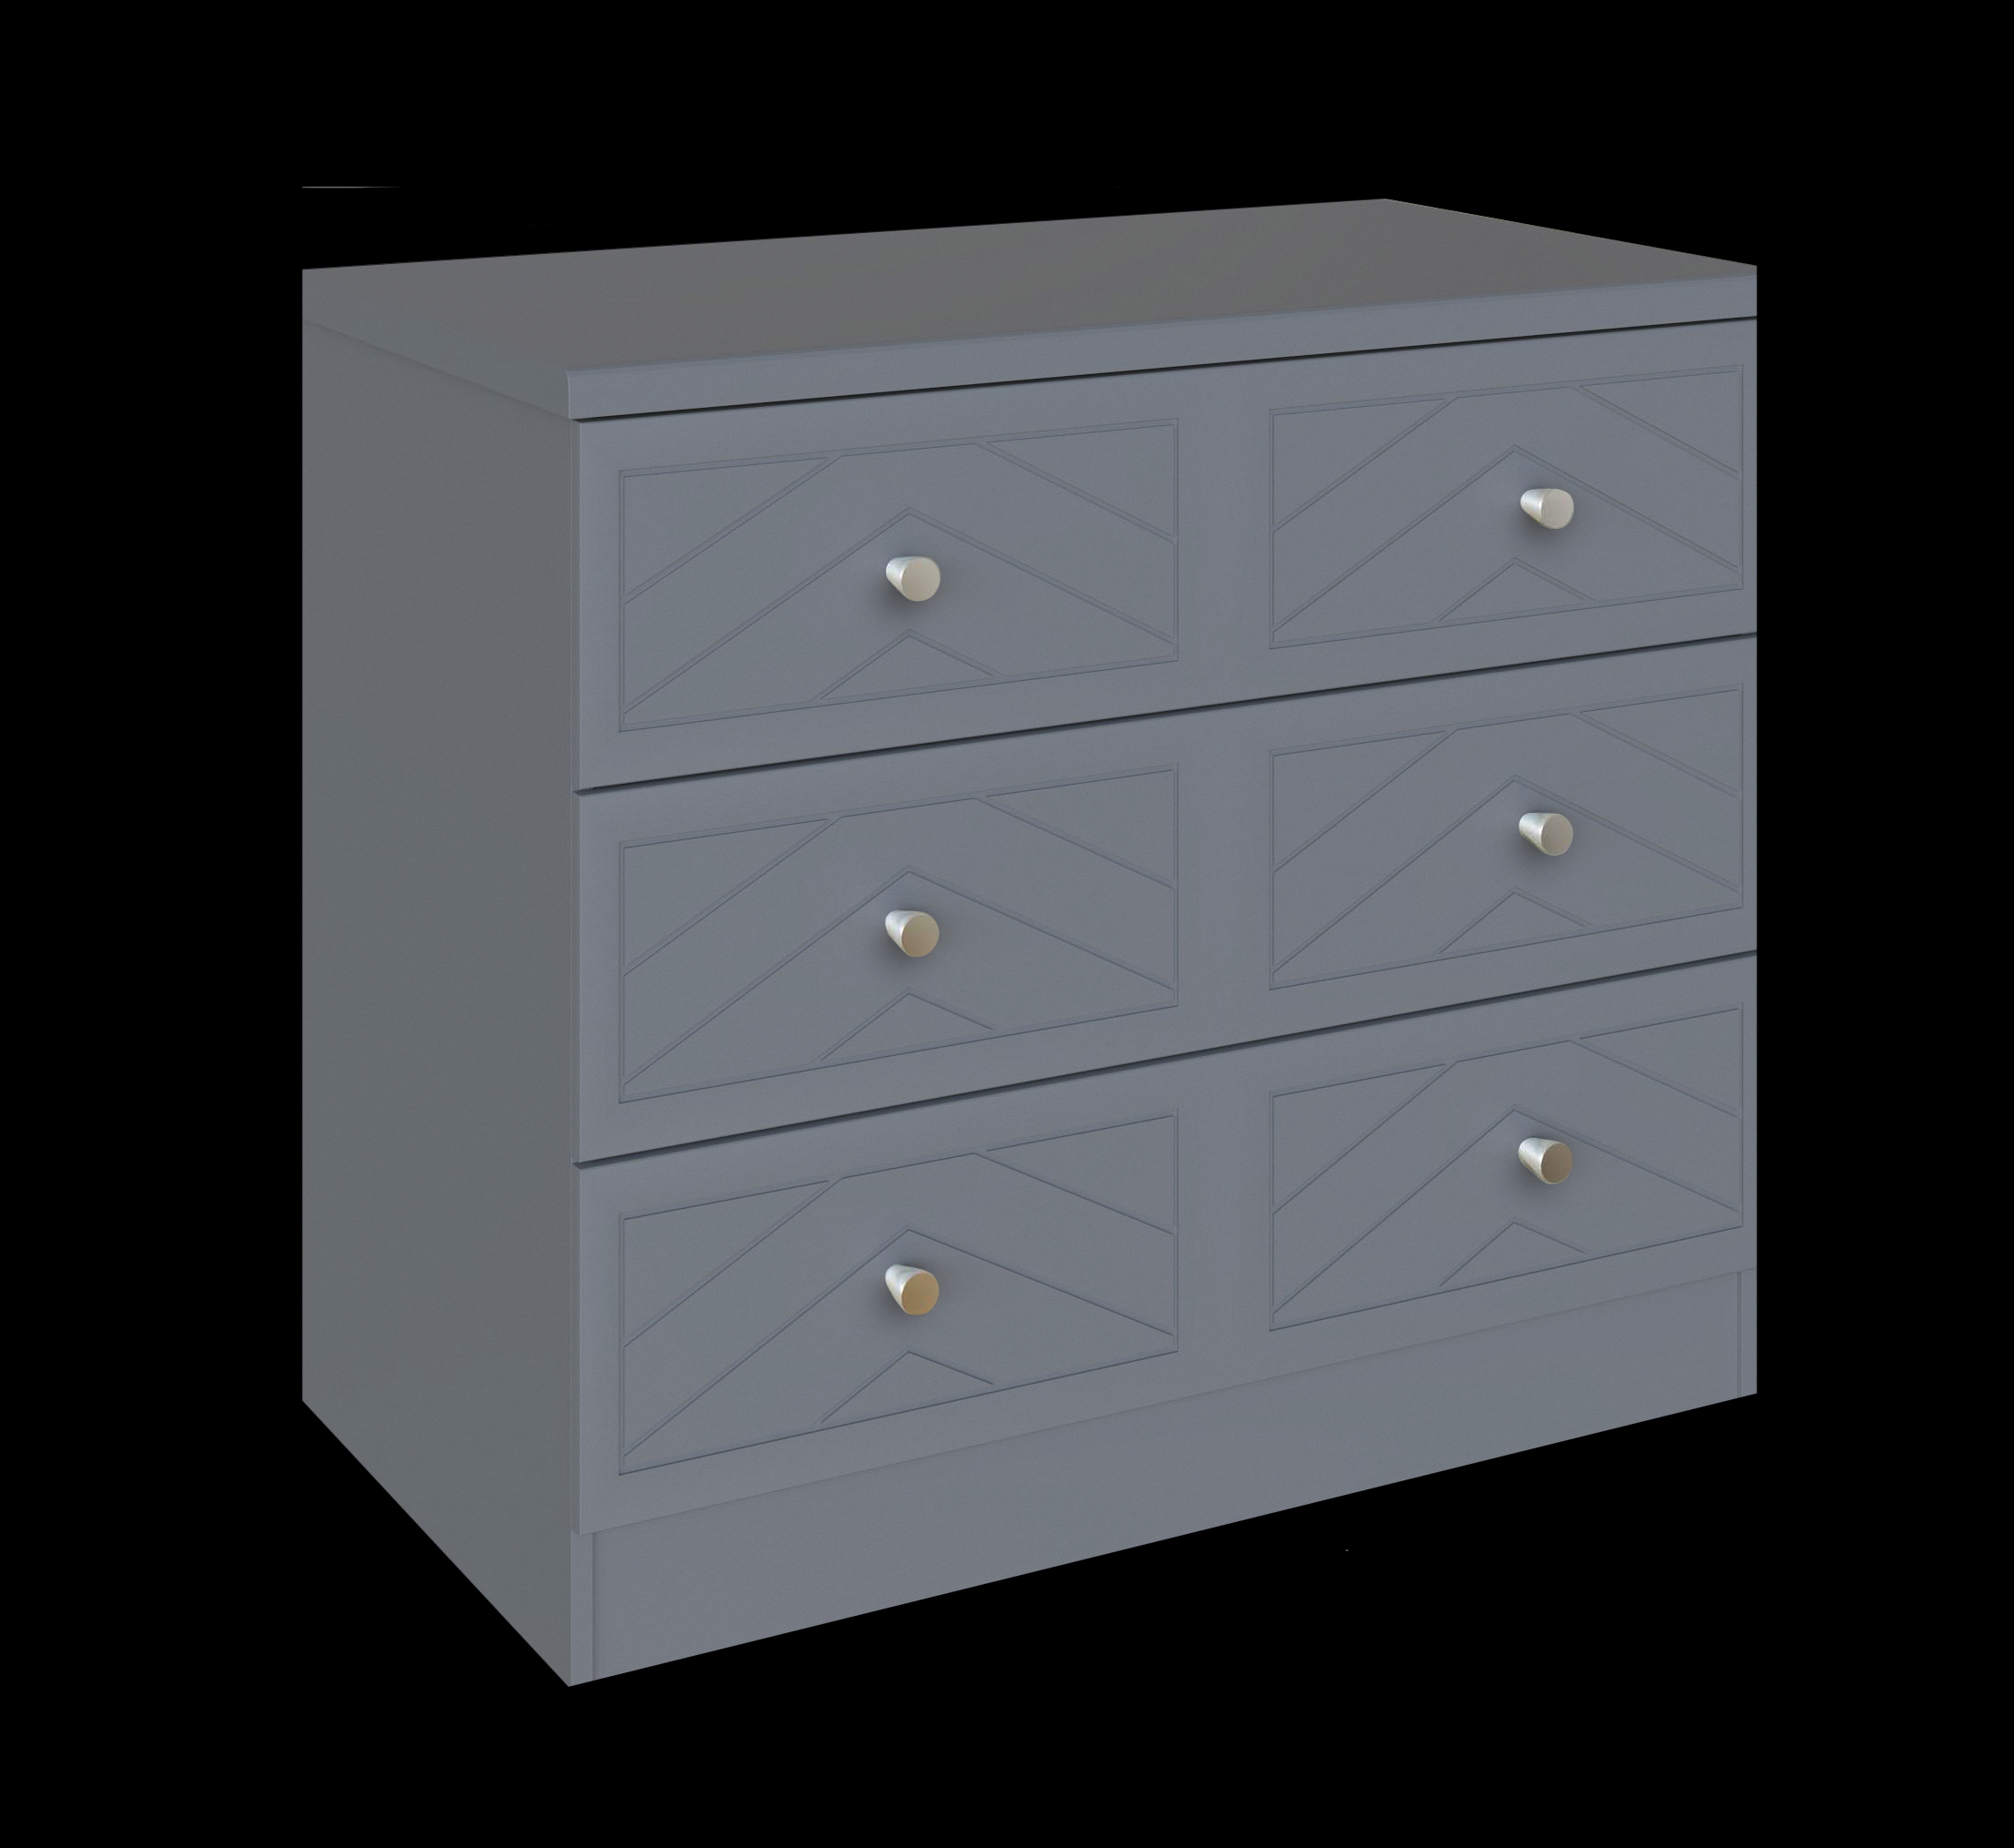 3 drawer wide chest